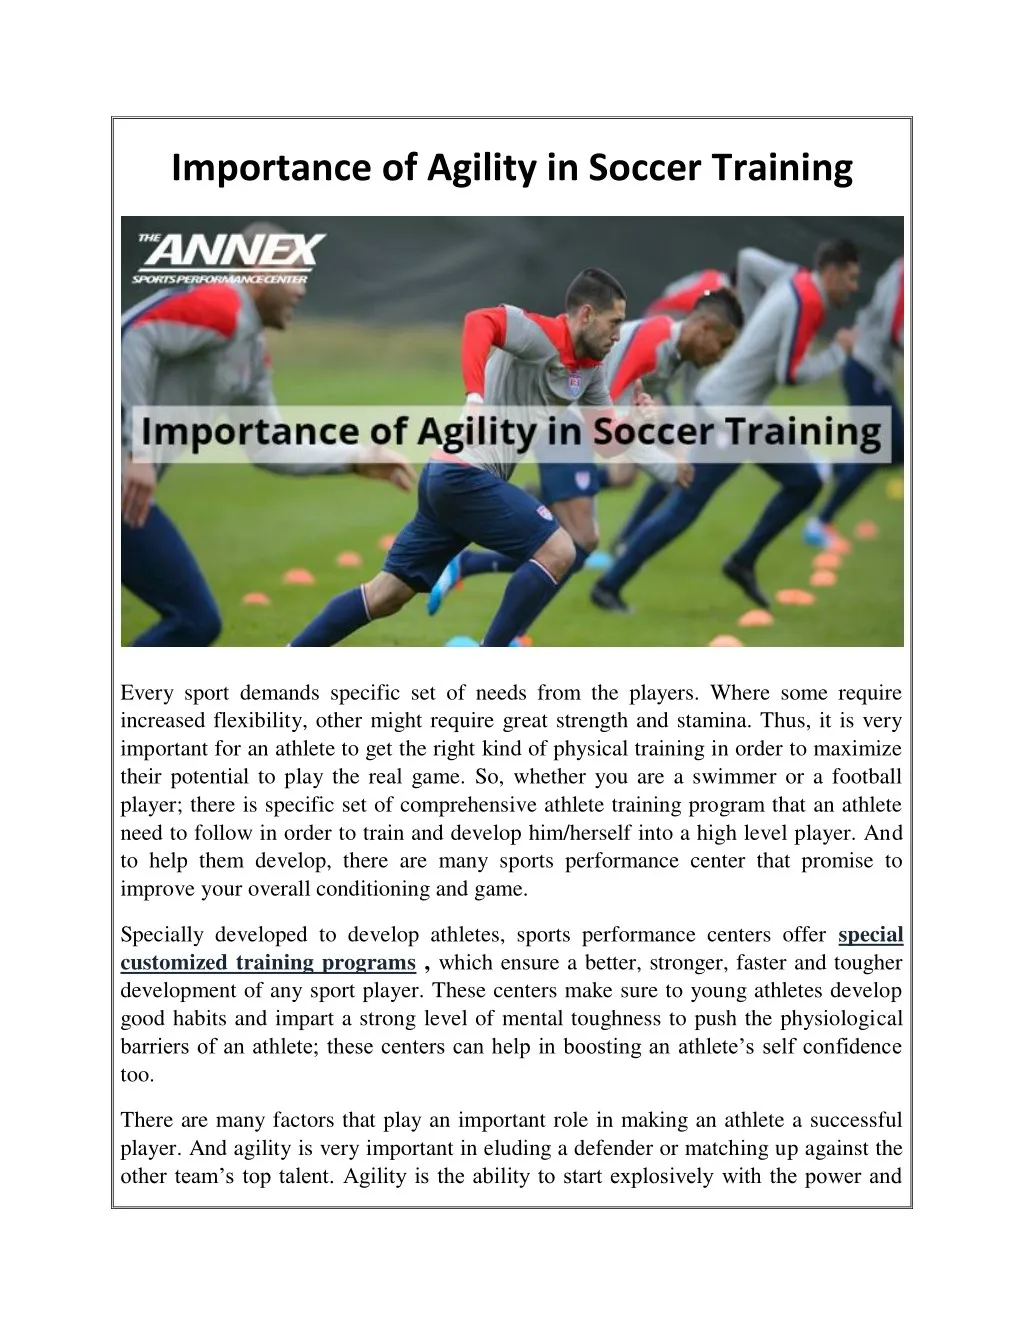 importance of agility in soccer training